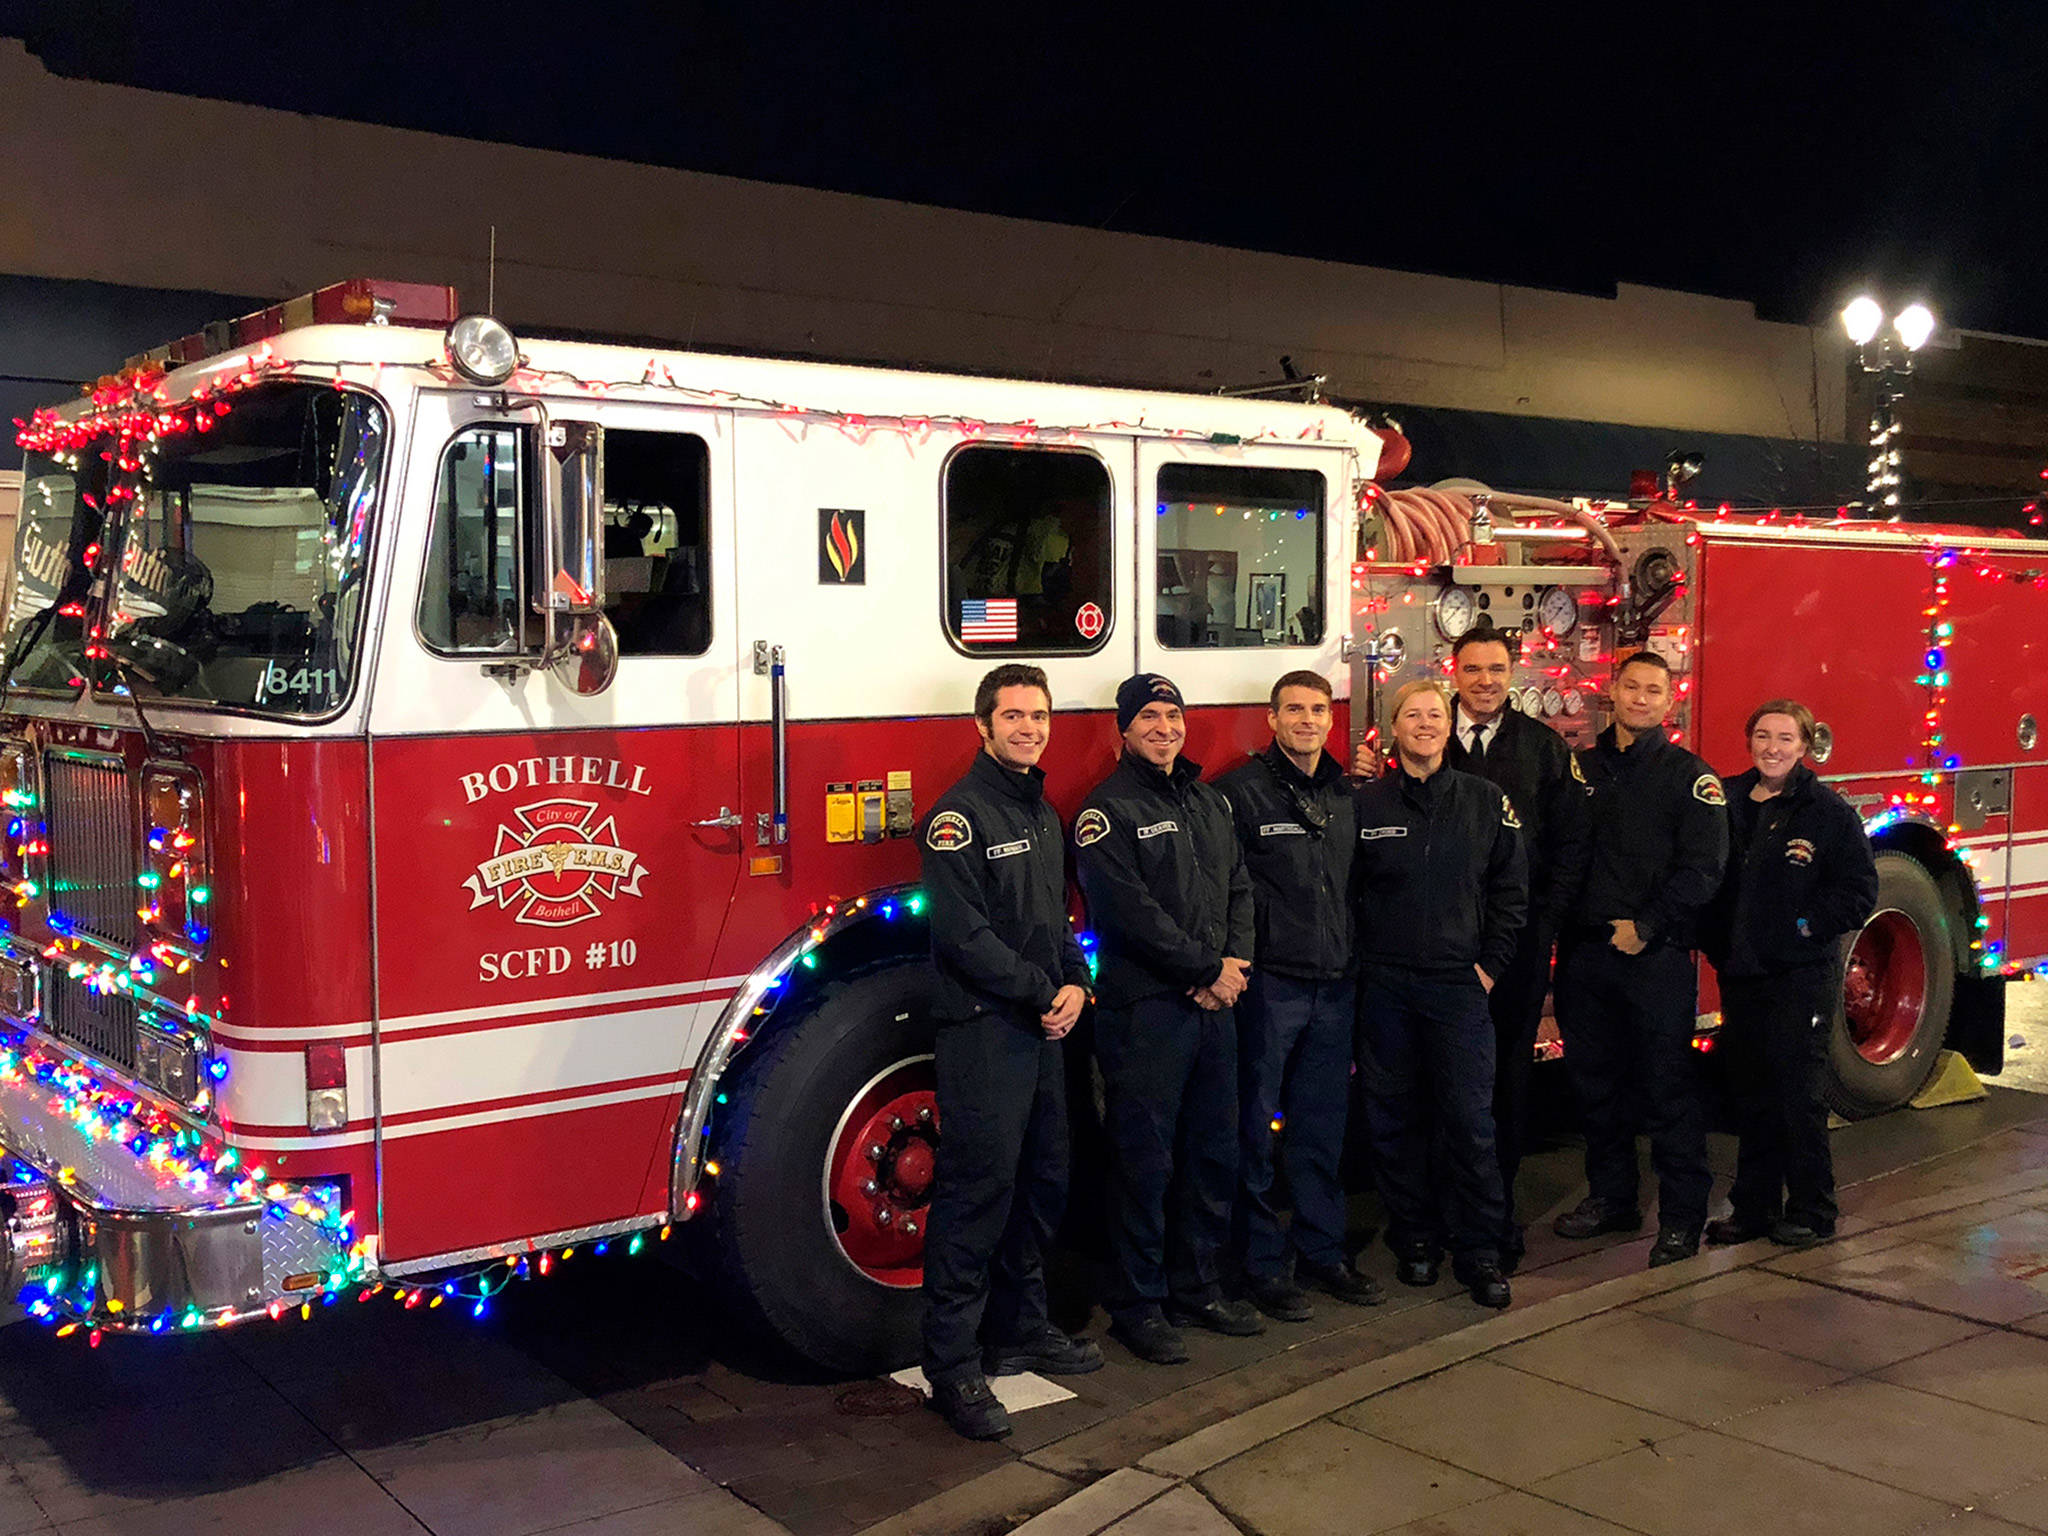 Bothell firefighters pose at the downtown tree lighting event on Dec. 2. Photo courtesy of the city of Bothell